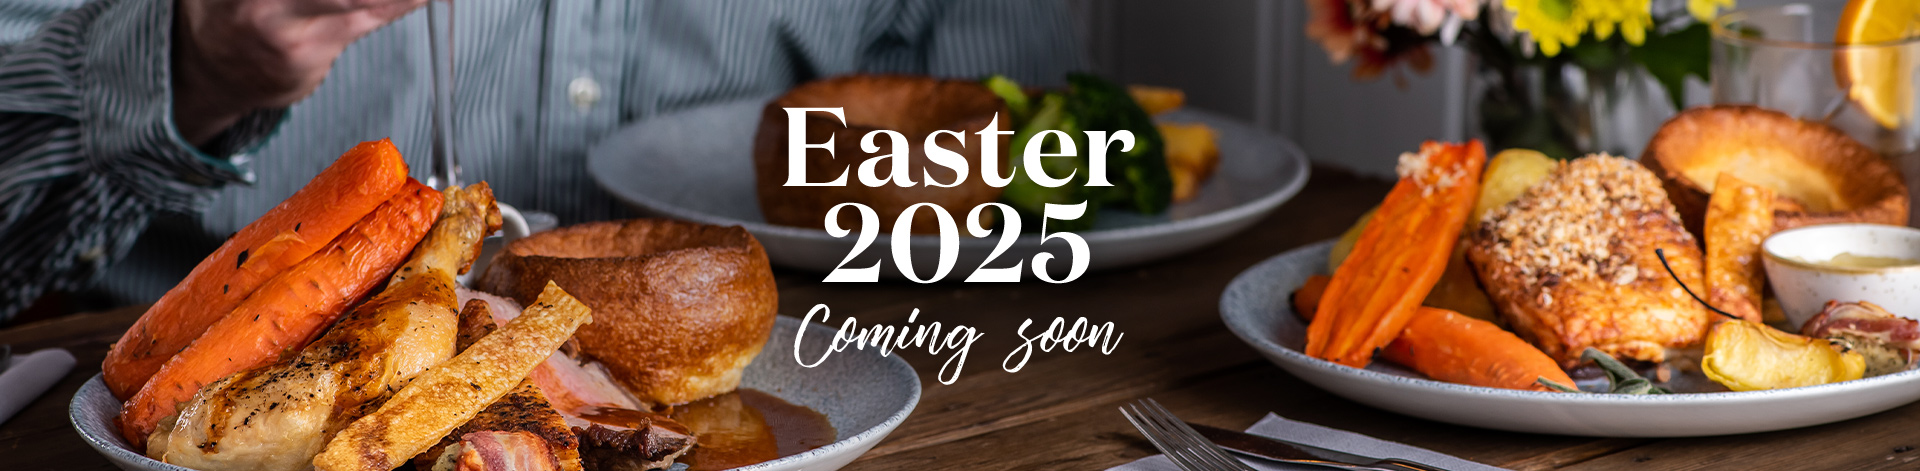 Easter at The Robin Hood, Clacton-on-Sea in Clacton-On-Sea